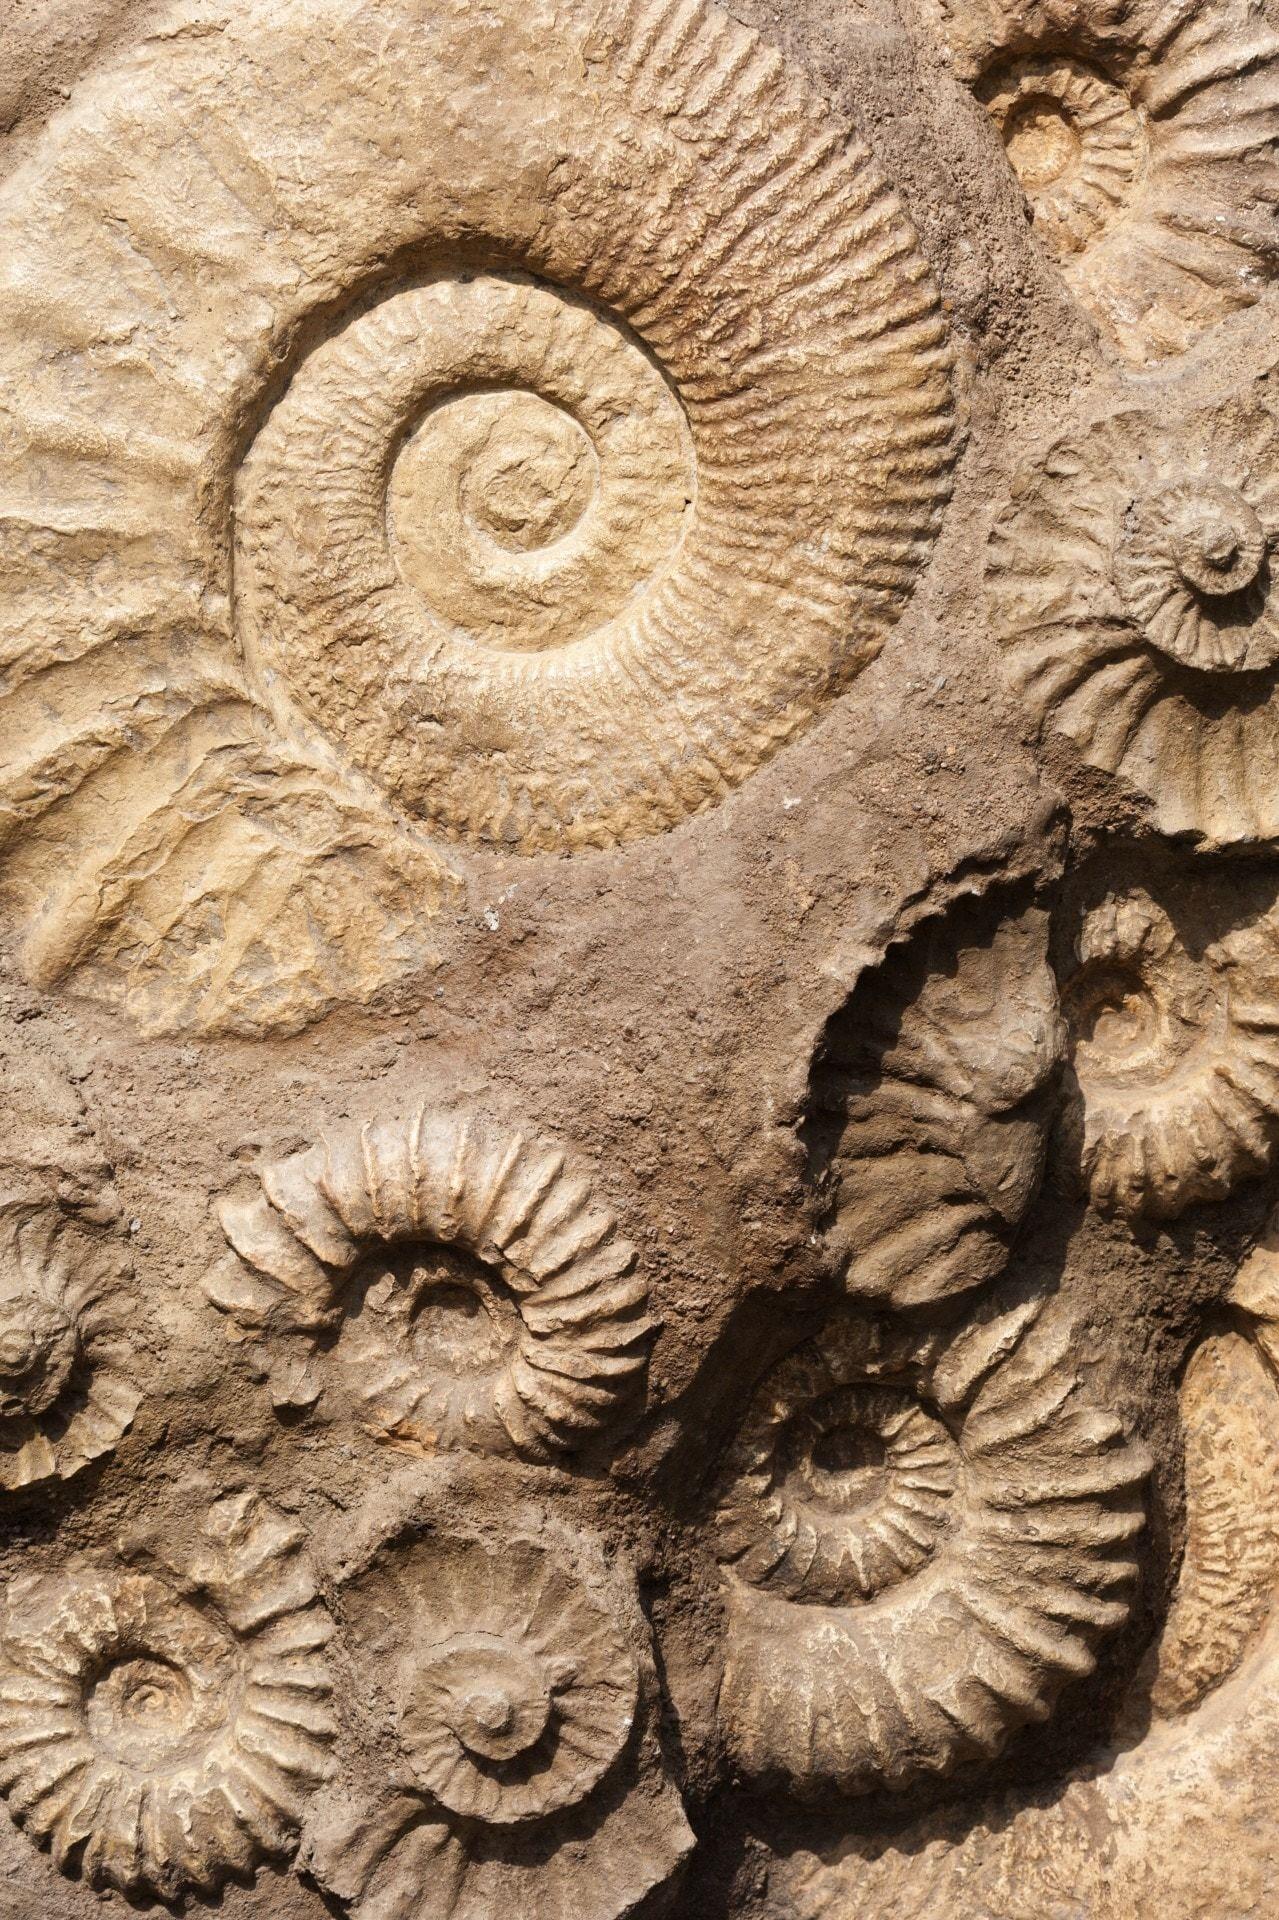 Stone, Shell, Fossil, Old, Ancient, fossil, extinct free image